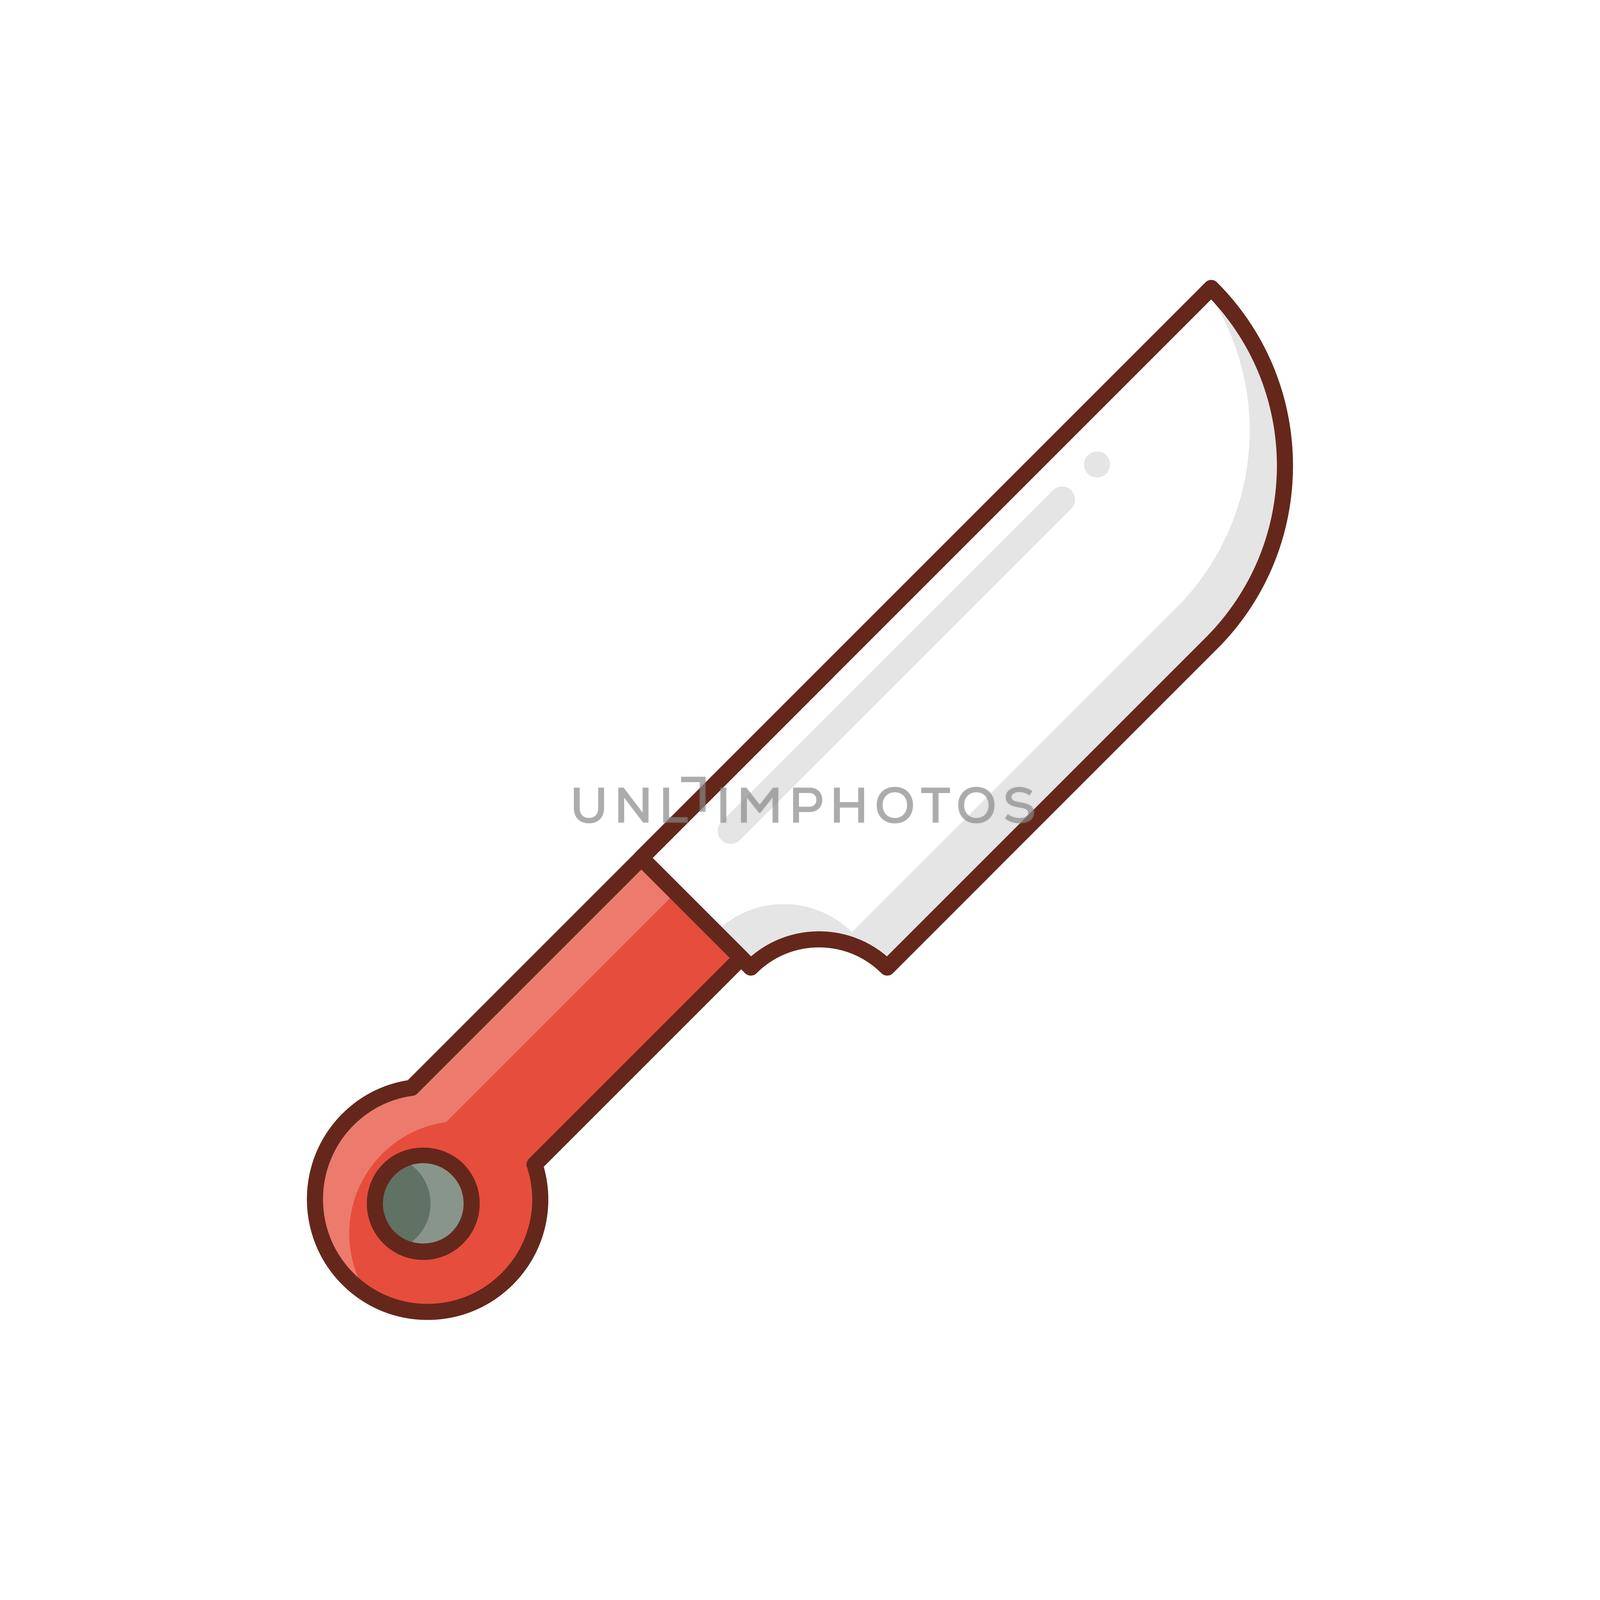 knife Vector illustration on a transparent background. Premium quality symbols. Vector Line Flat color icon for concept and graphic design.